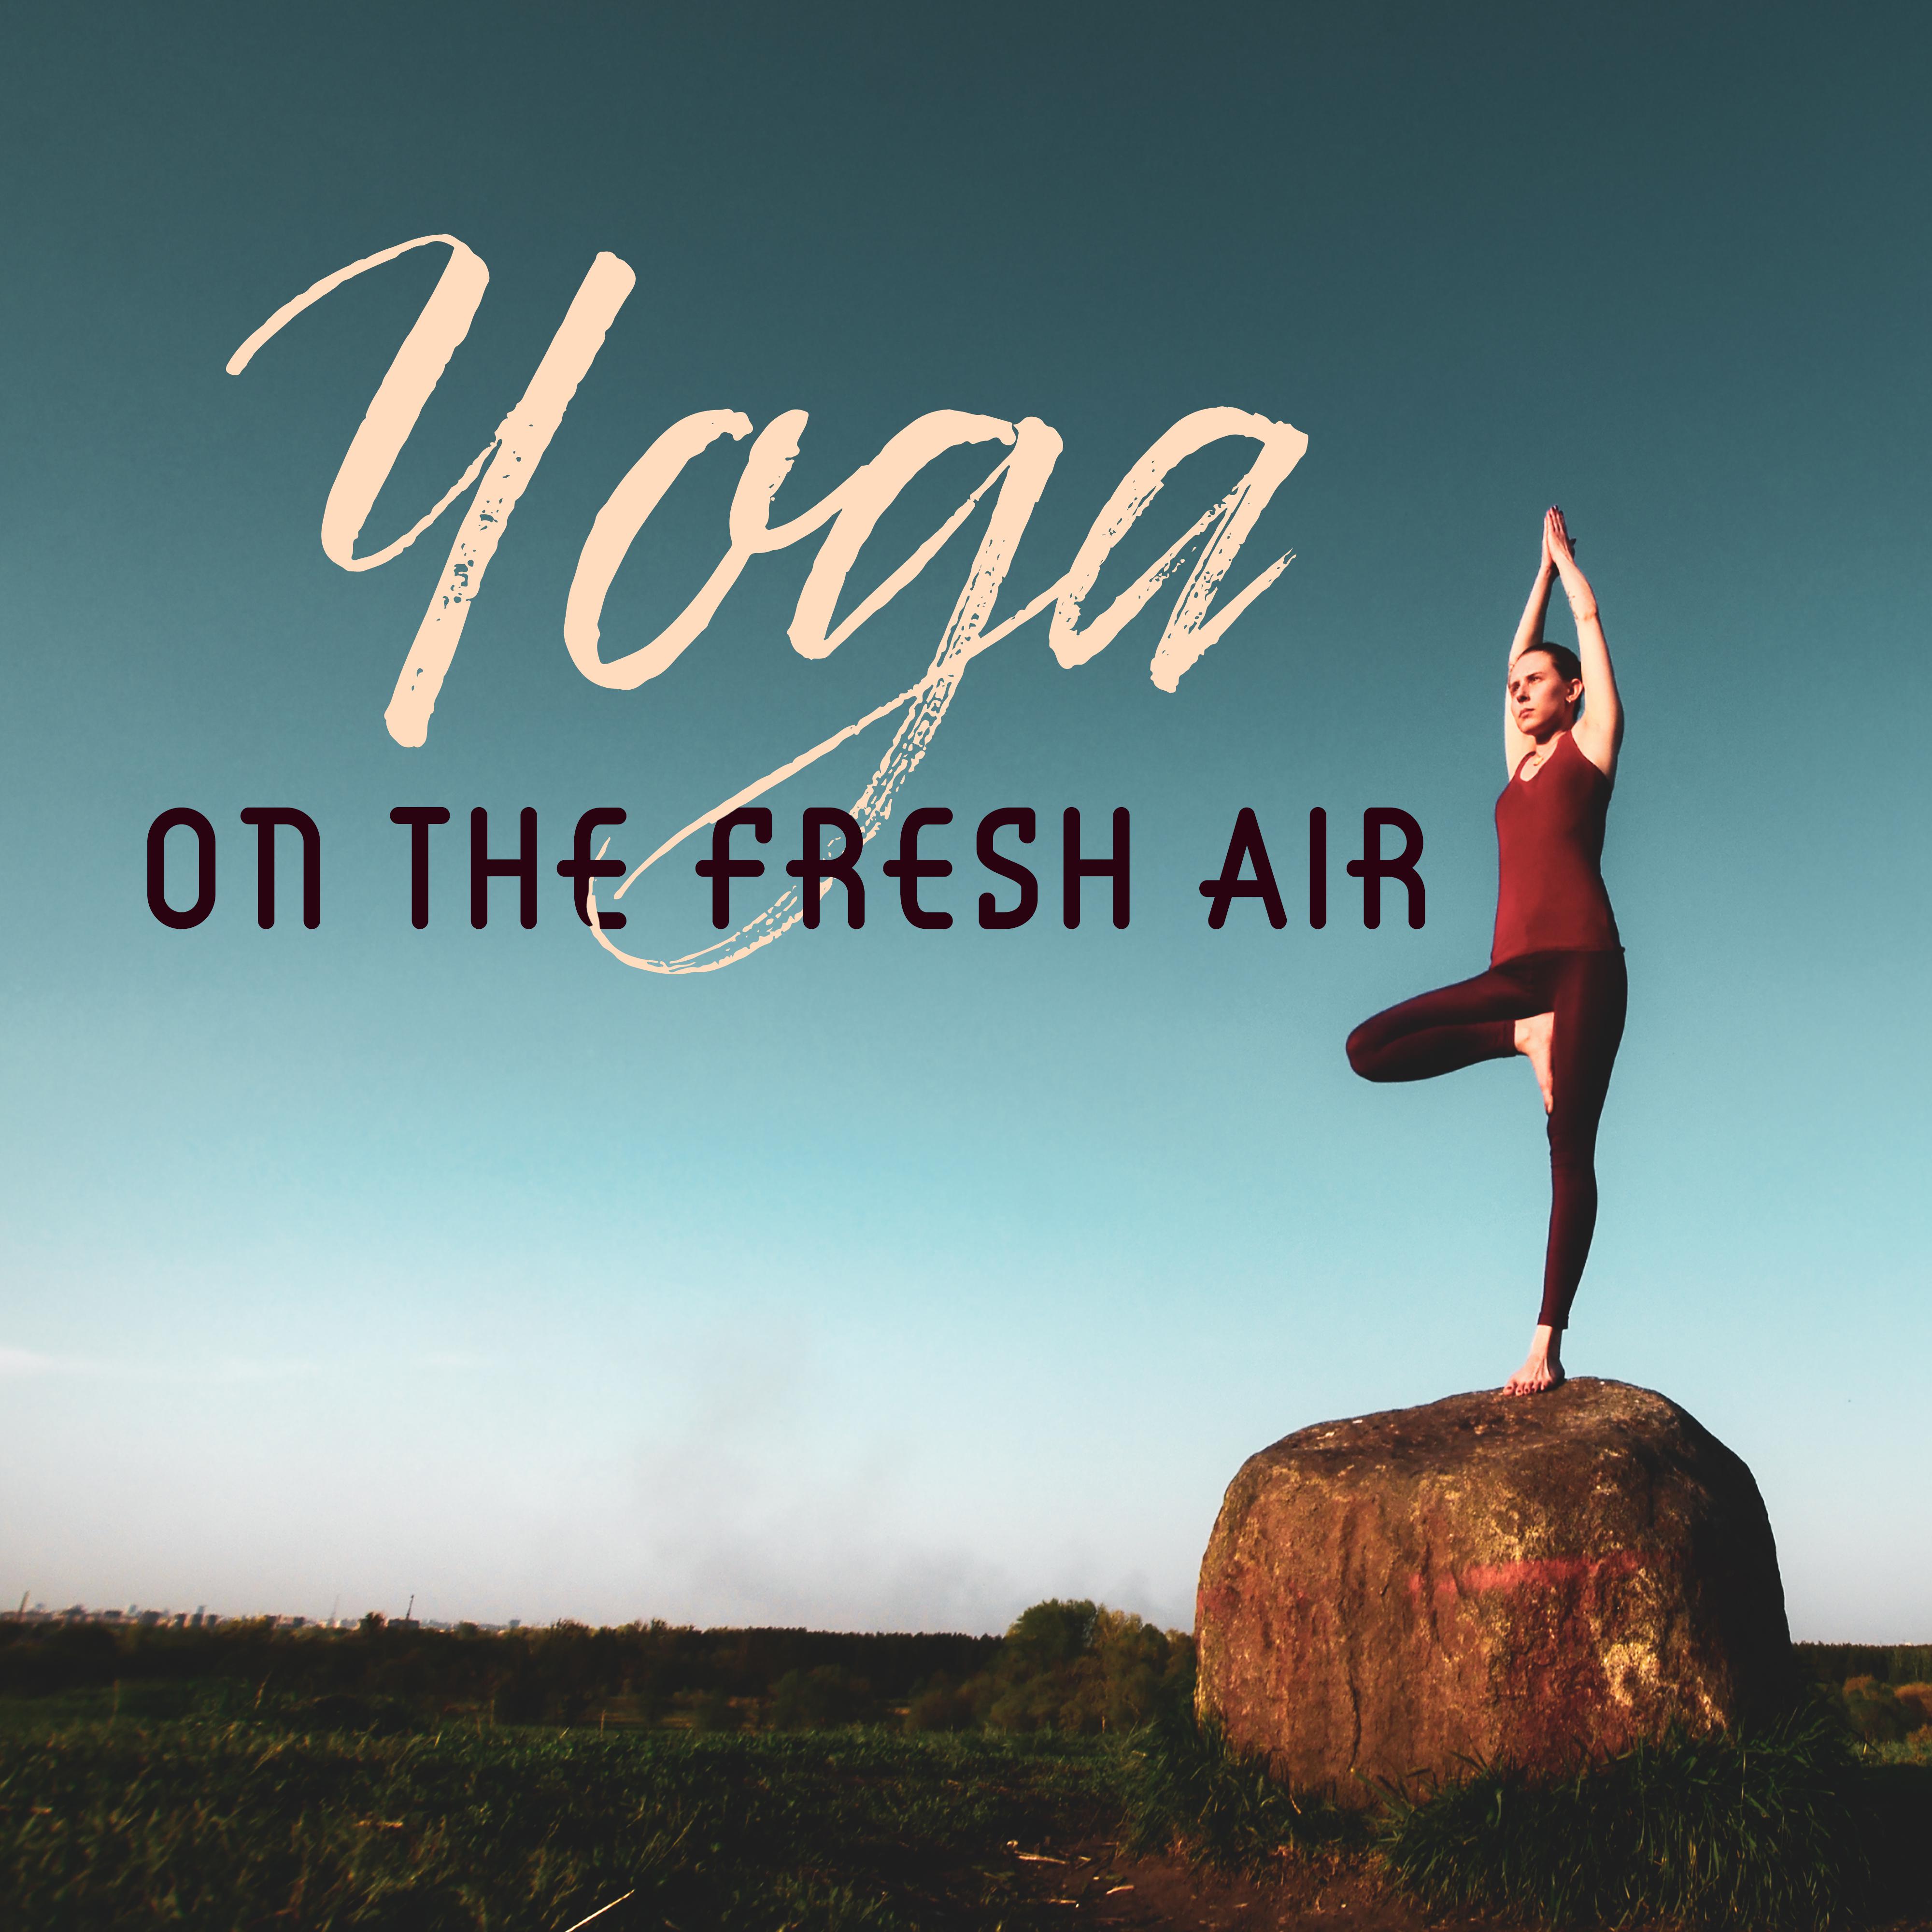 Yoga on the Fresh Air: Best 2019 New Age Ambient & Nature Music for Meditation & Relaxation, Chkra Healing, Third Eye Opening, Mantra Zen Sounds